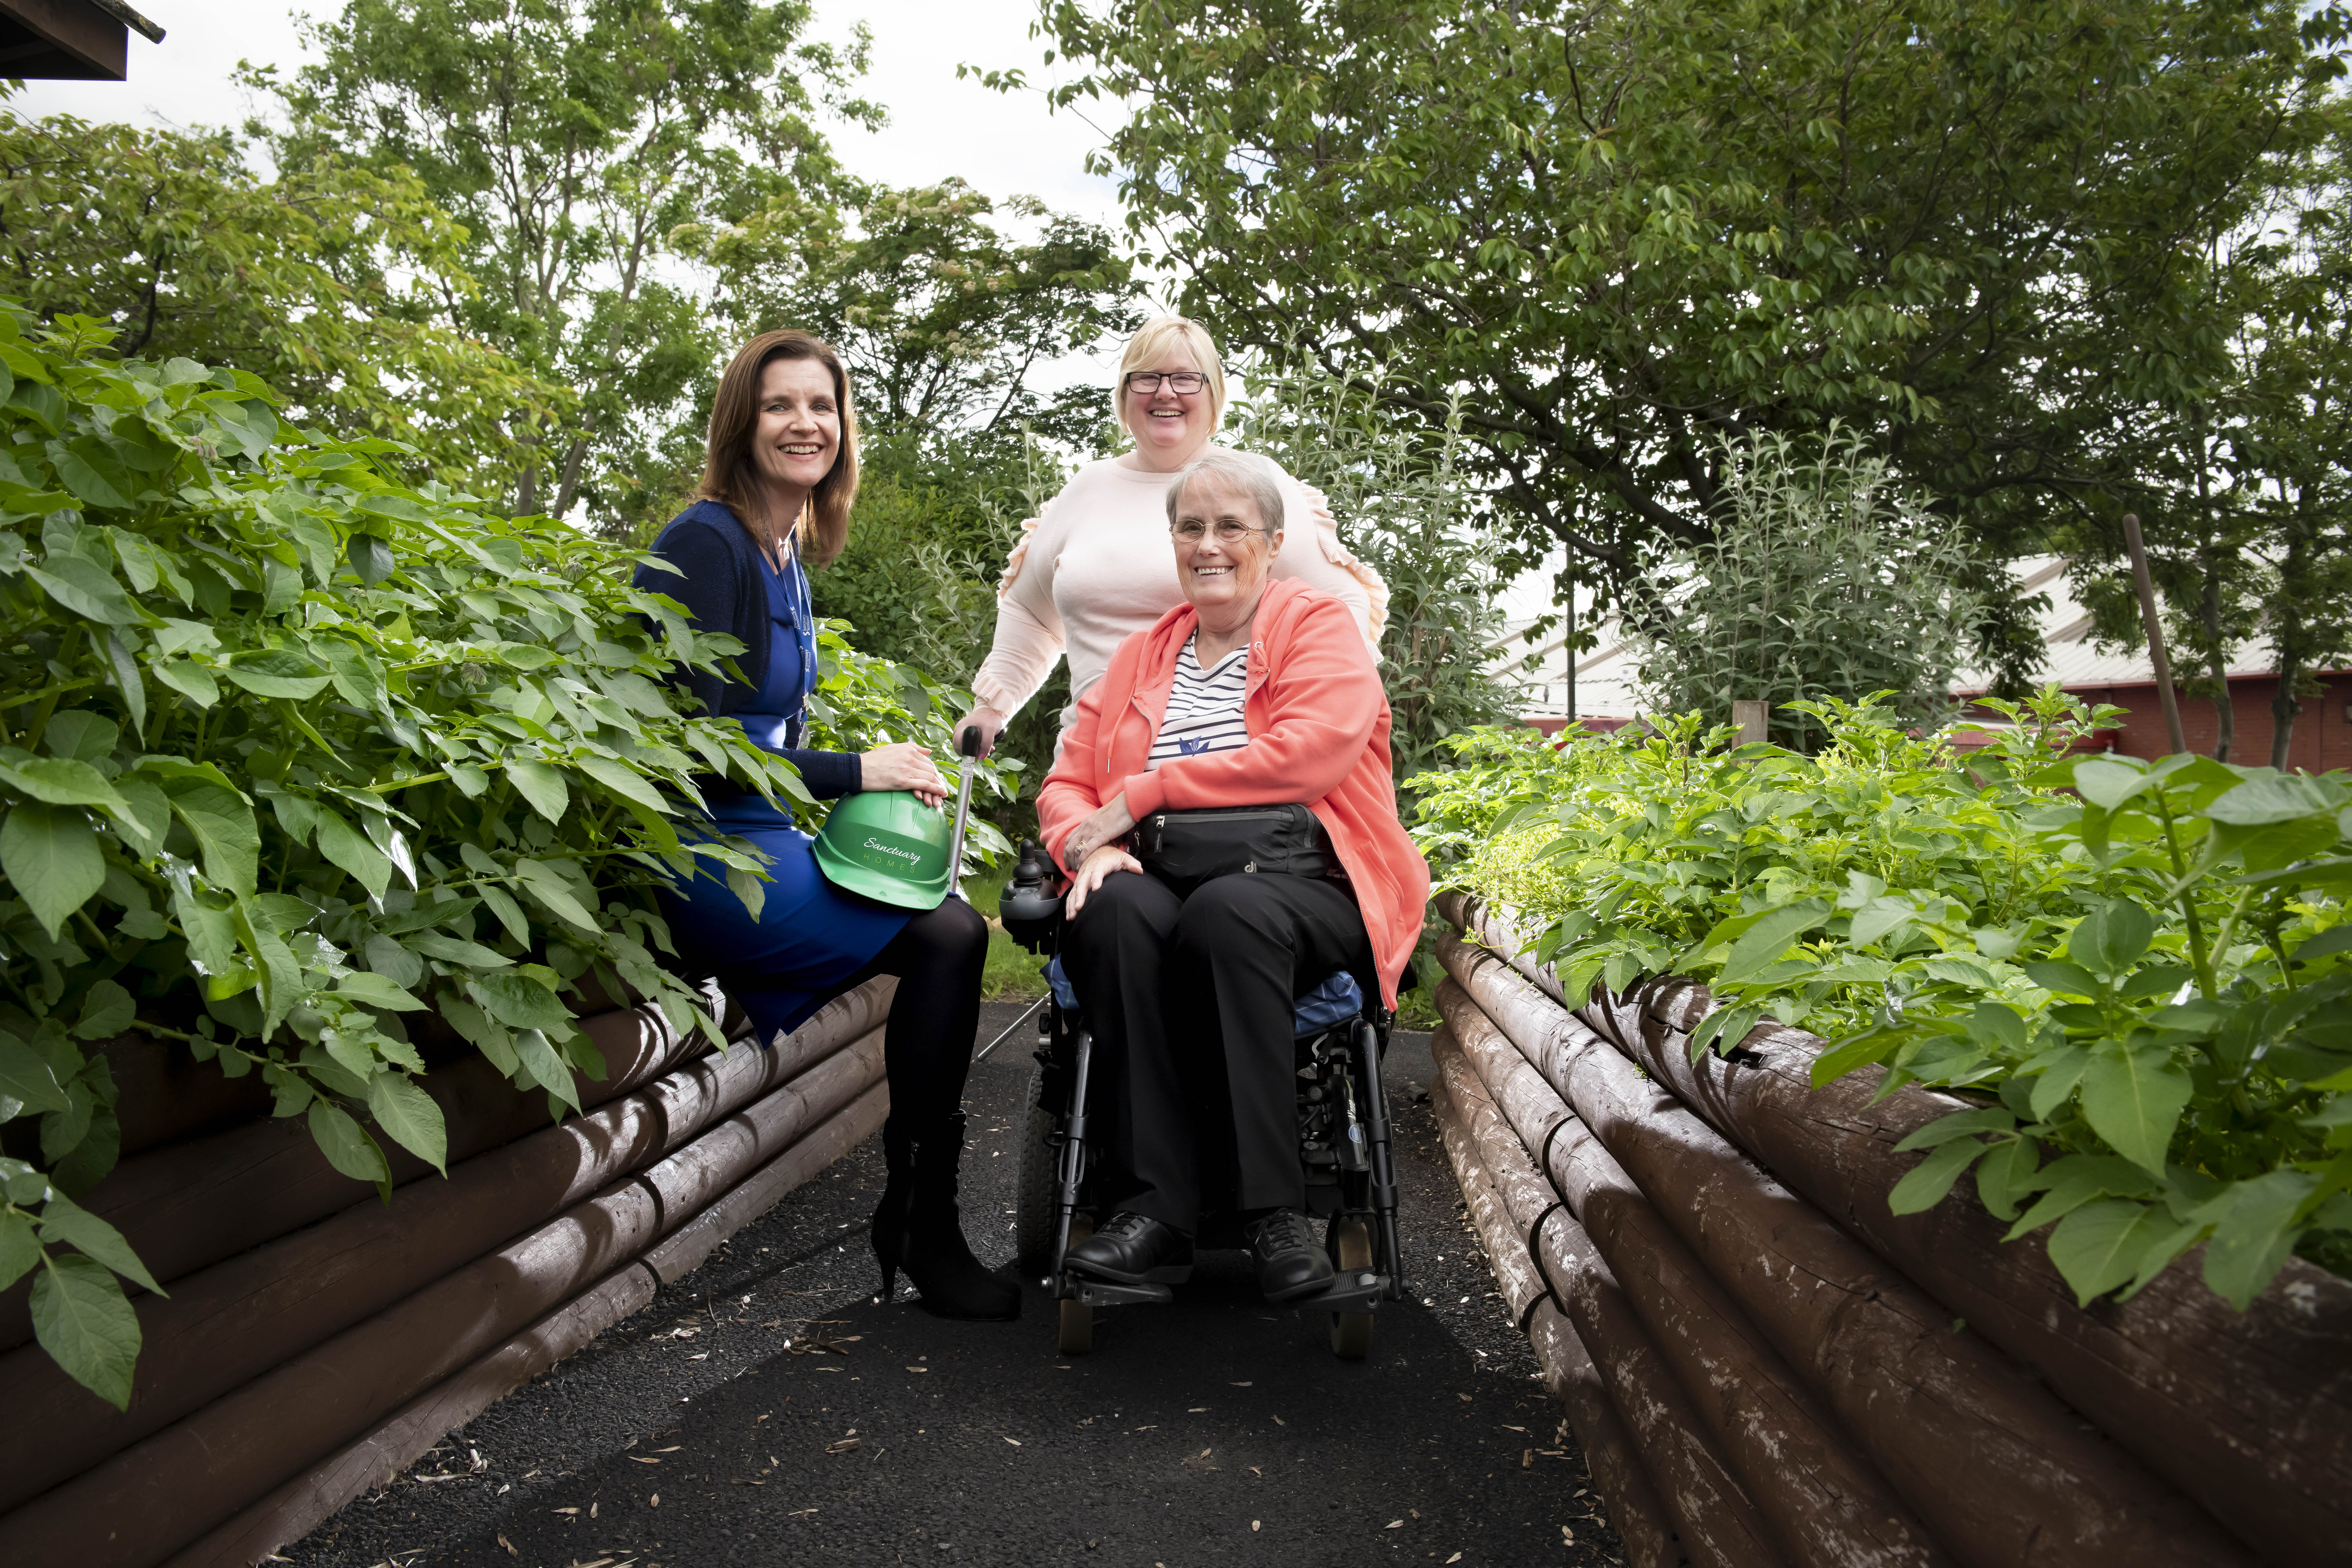 Centre users gladly led up garden path after Sanctuary renovation